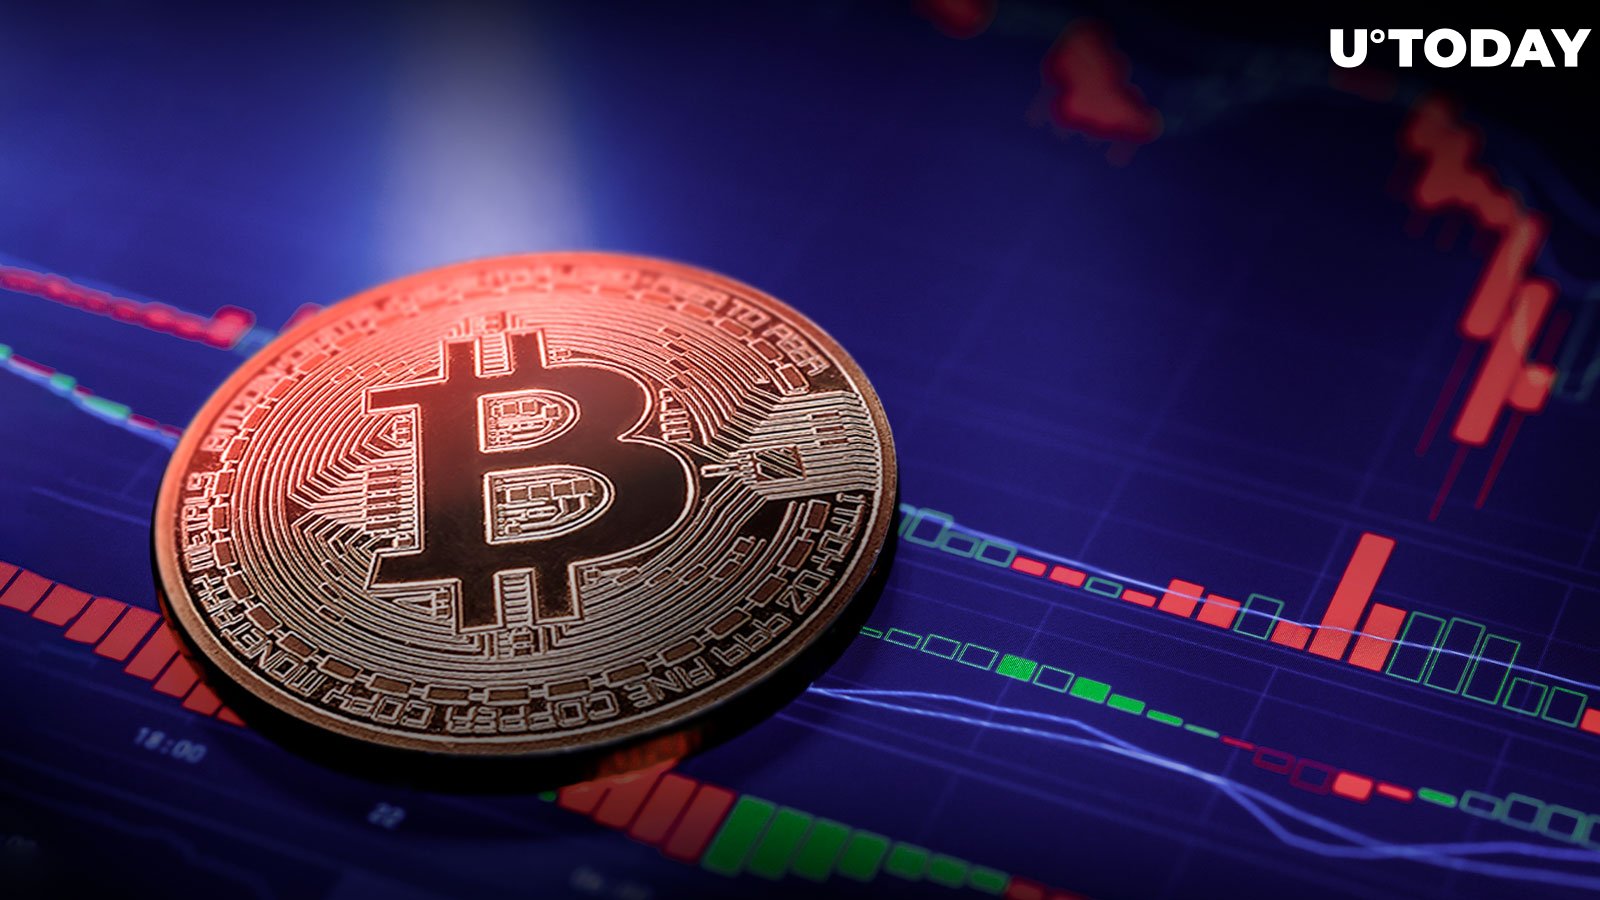 Key Reason Why Bitcoin (BTC) Price Just Collapsed